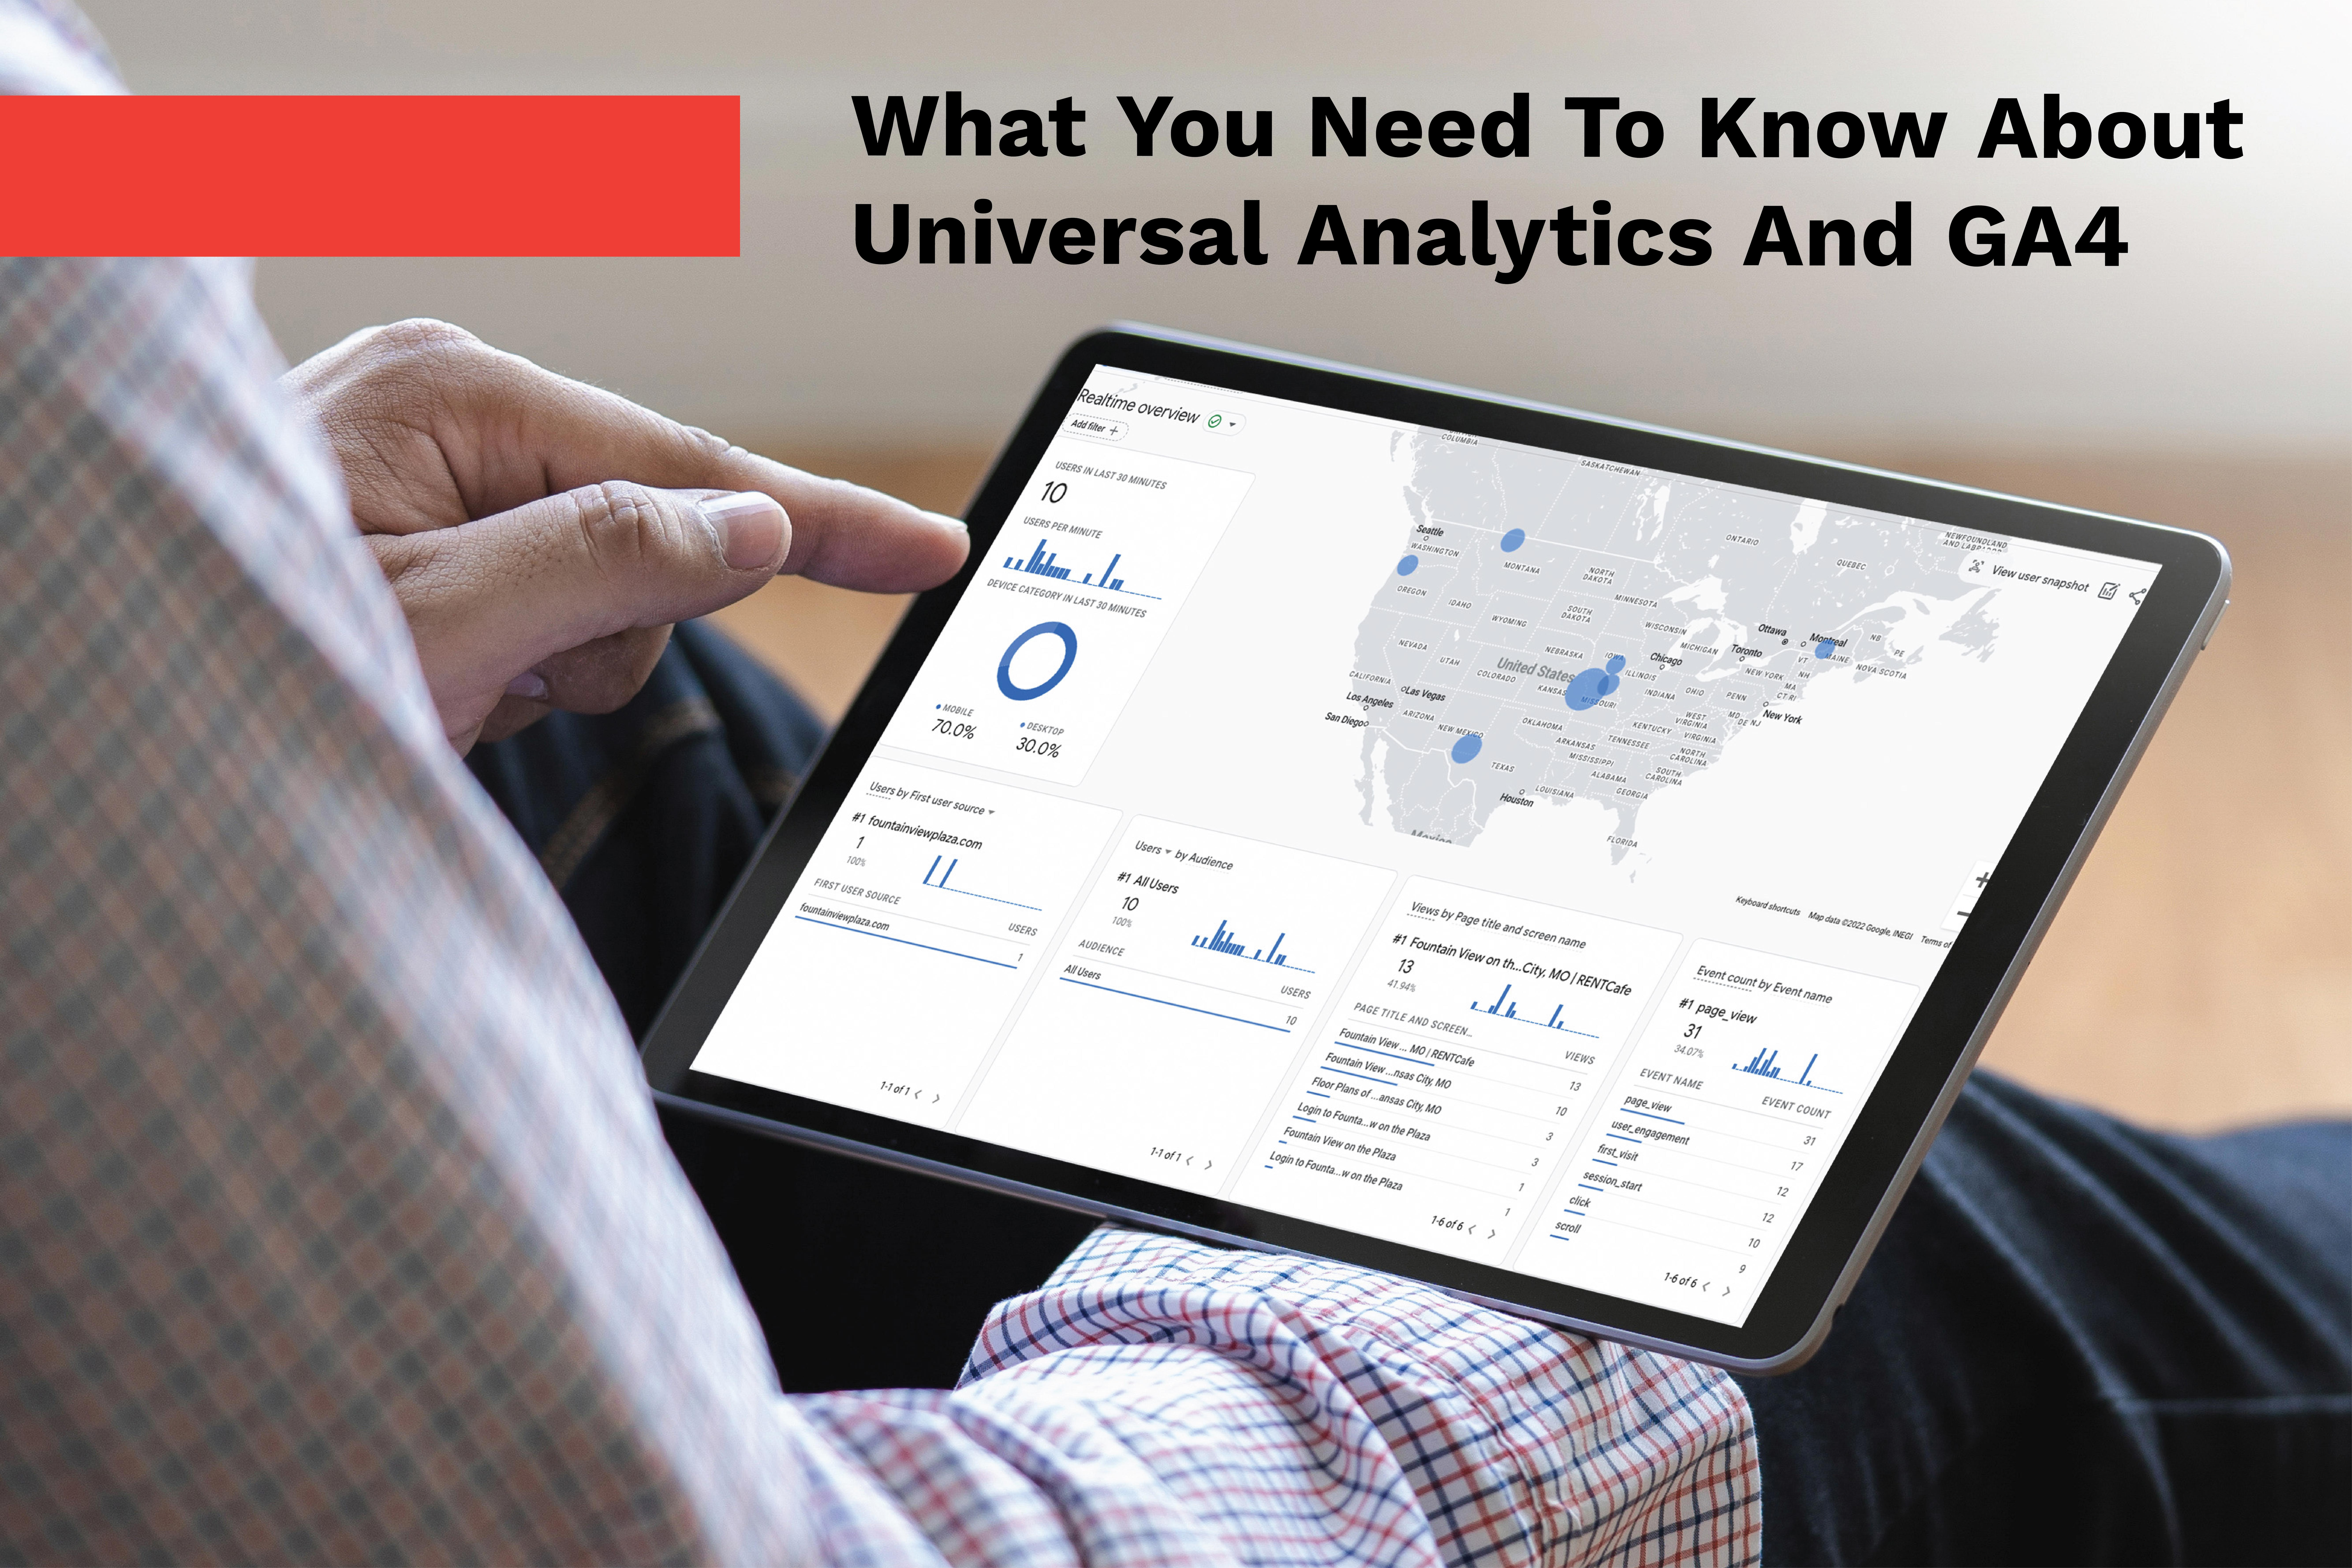 What You Need to Know About Universal Analytics and GA4